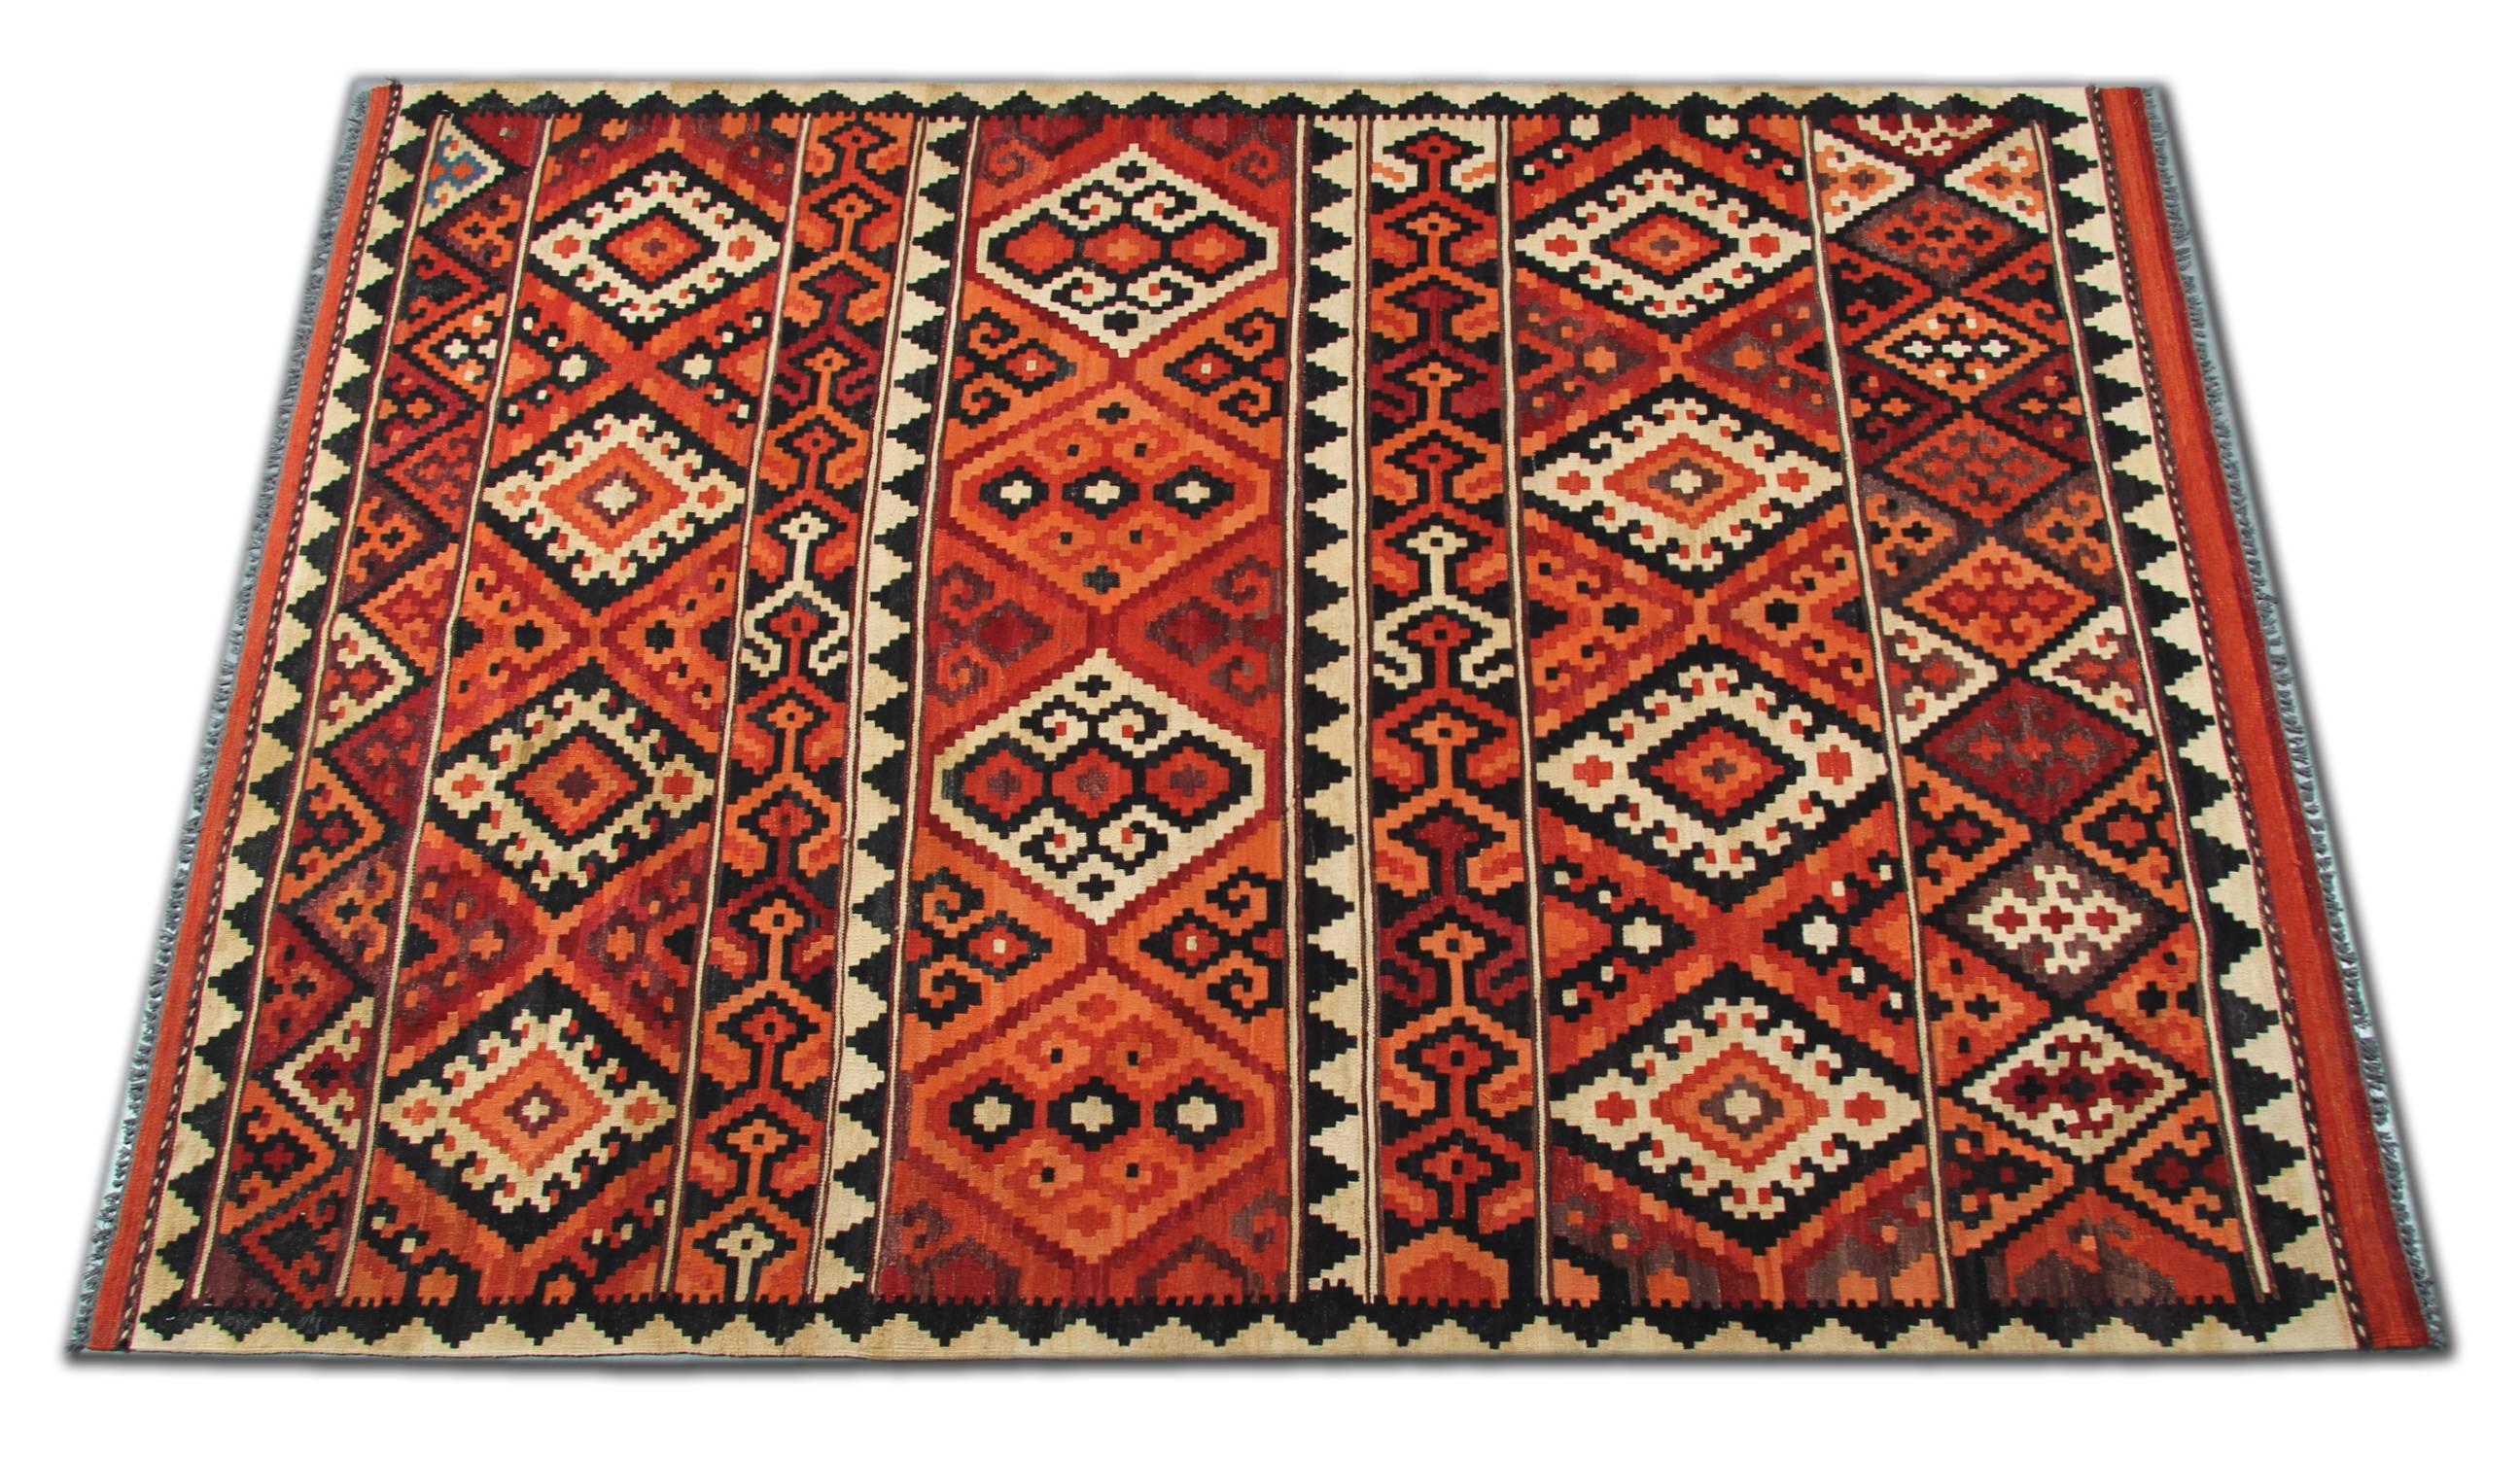 These tribal kilims  are handmade rugs in Afghanistan. These high quality rugs are made of the finest wool and cotton. For the production of these wool rugs, the rug dyes are completely organic. The geometric rug design is traditional and the woven